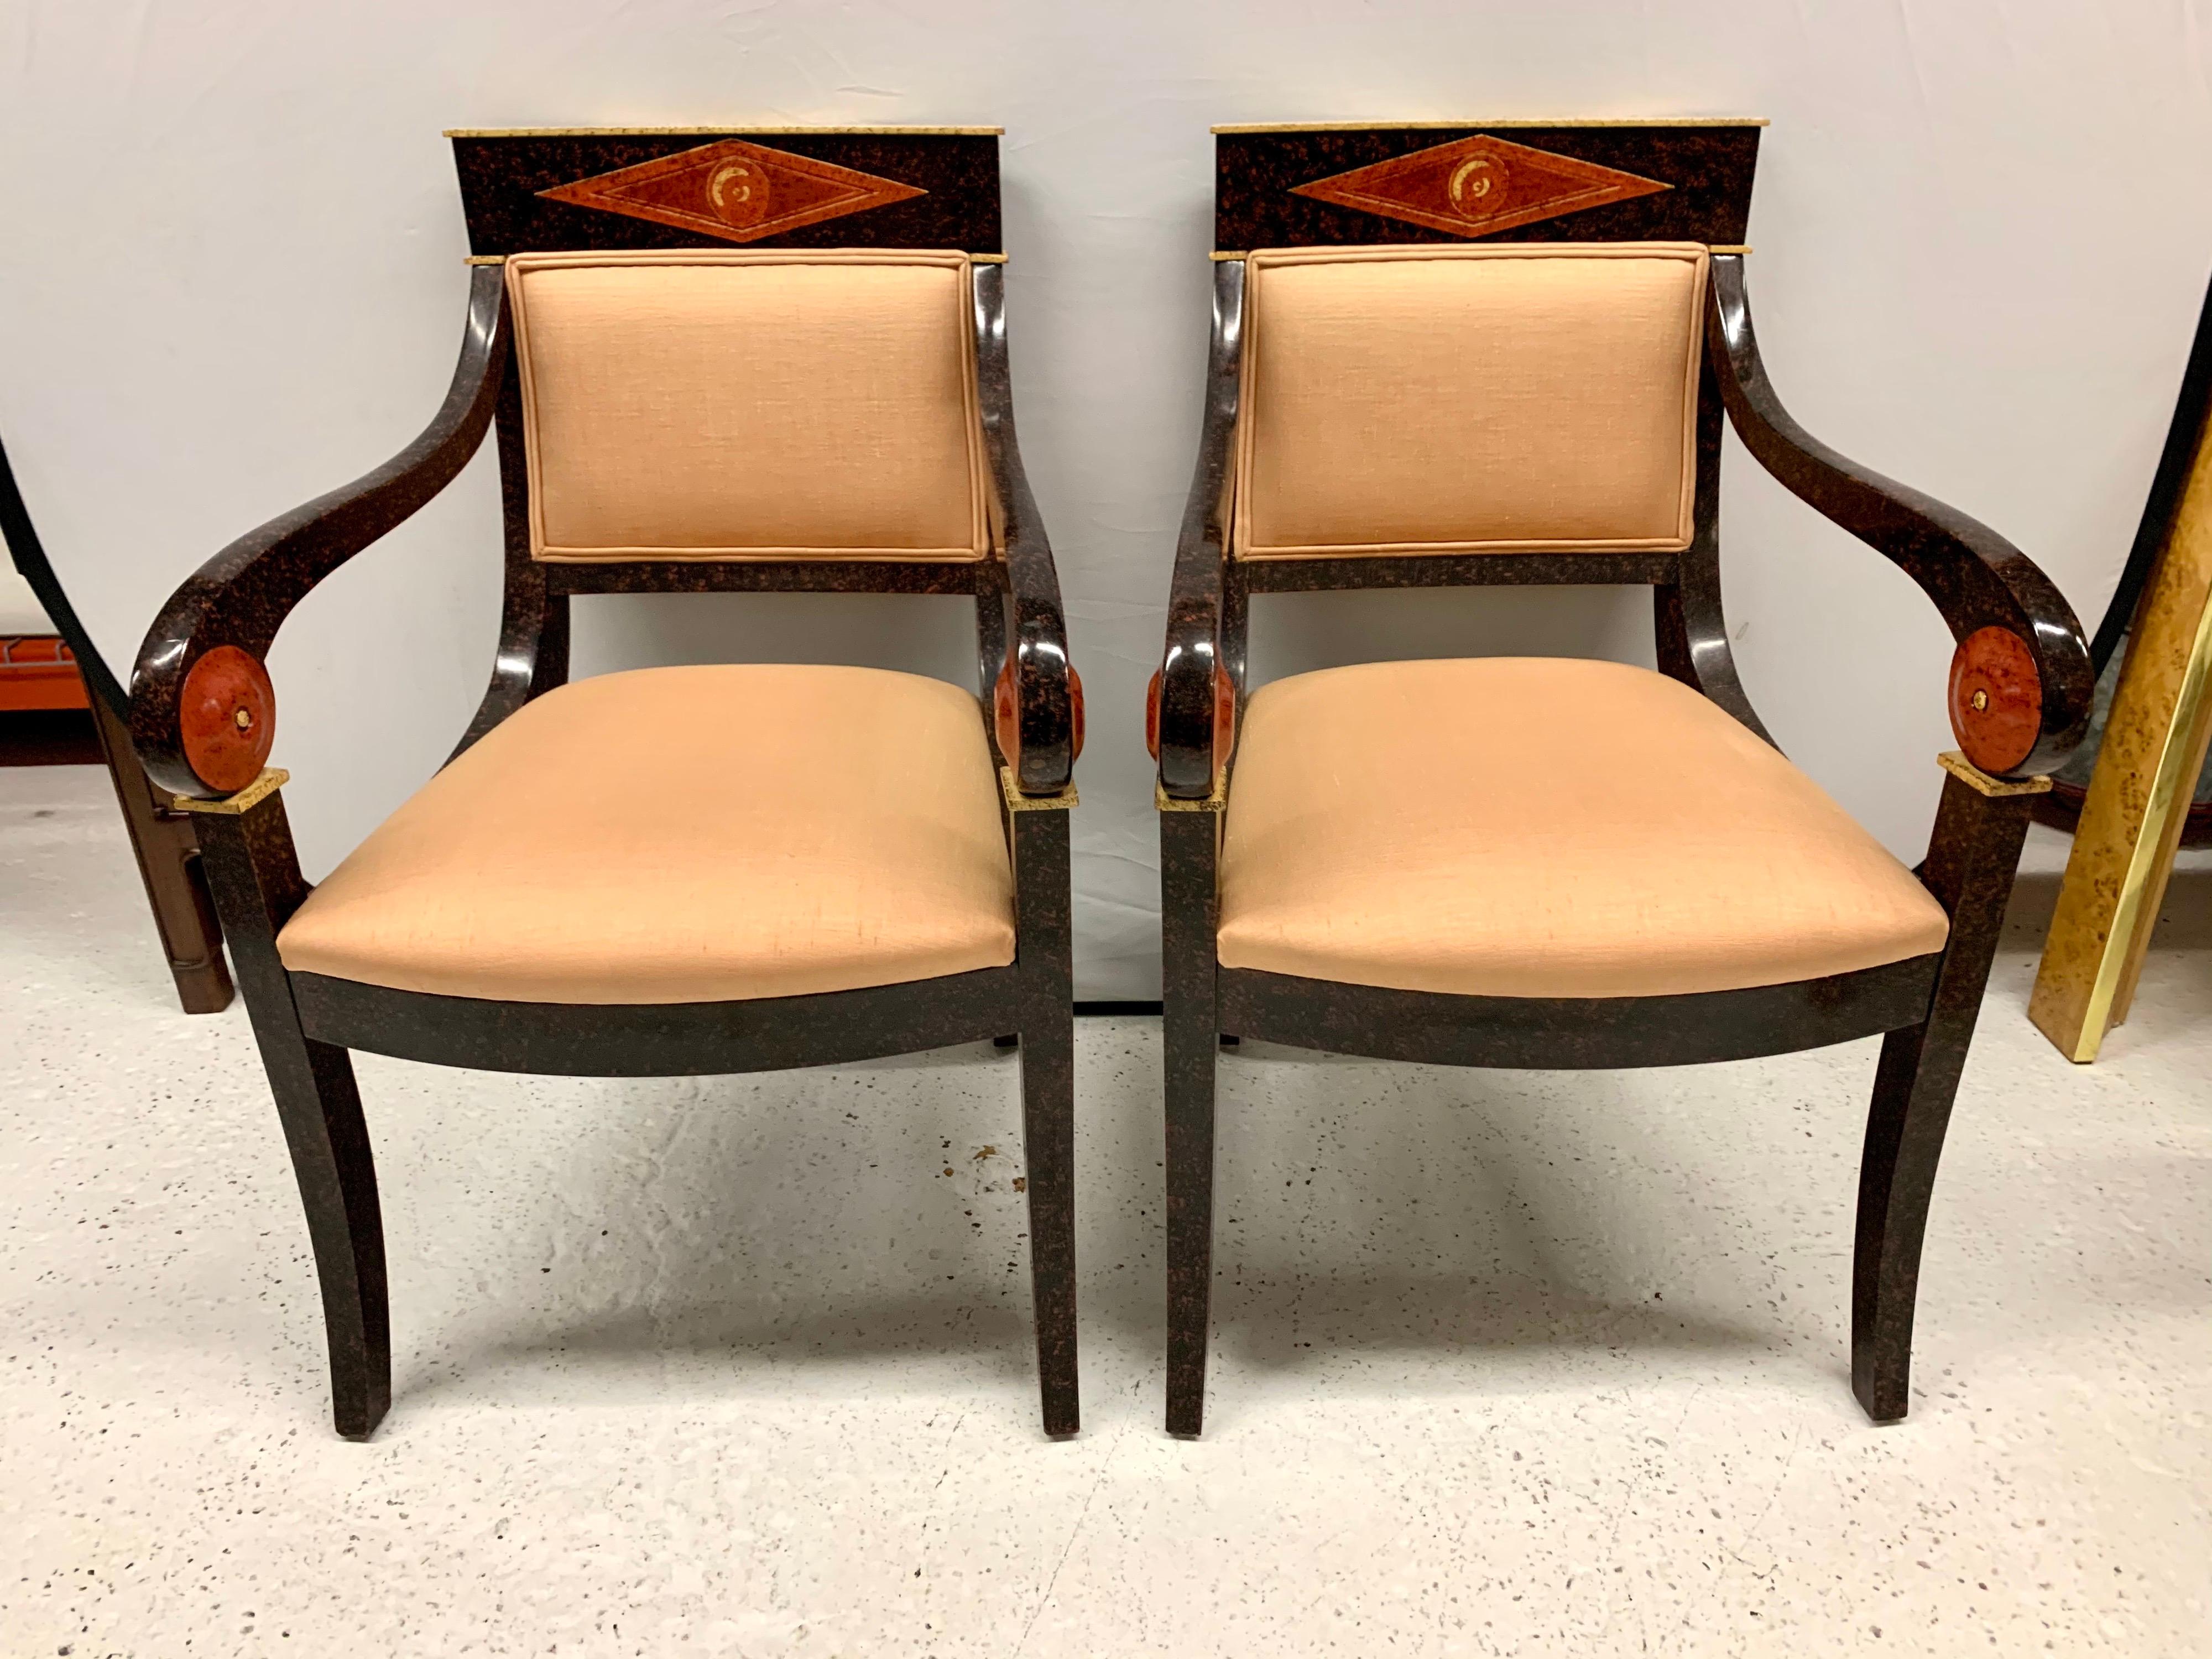 Magnificent set of seven neoclassical dining chairs including three armchairs and four
side chairs, for a total of seven chairs in all. Upholstered seats and backrest. Stunning 
hand painted wood. Now, more than ever, home is where the heart is.